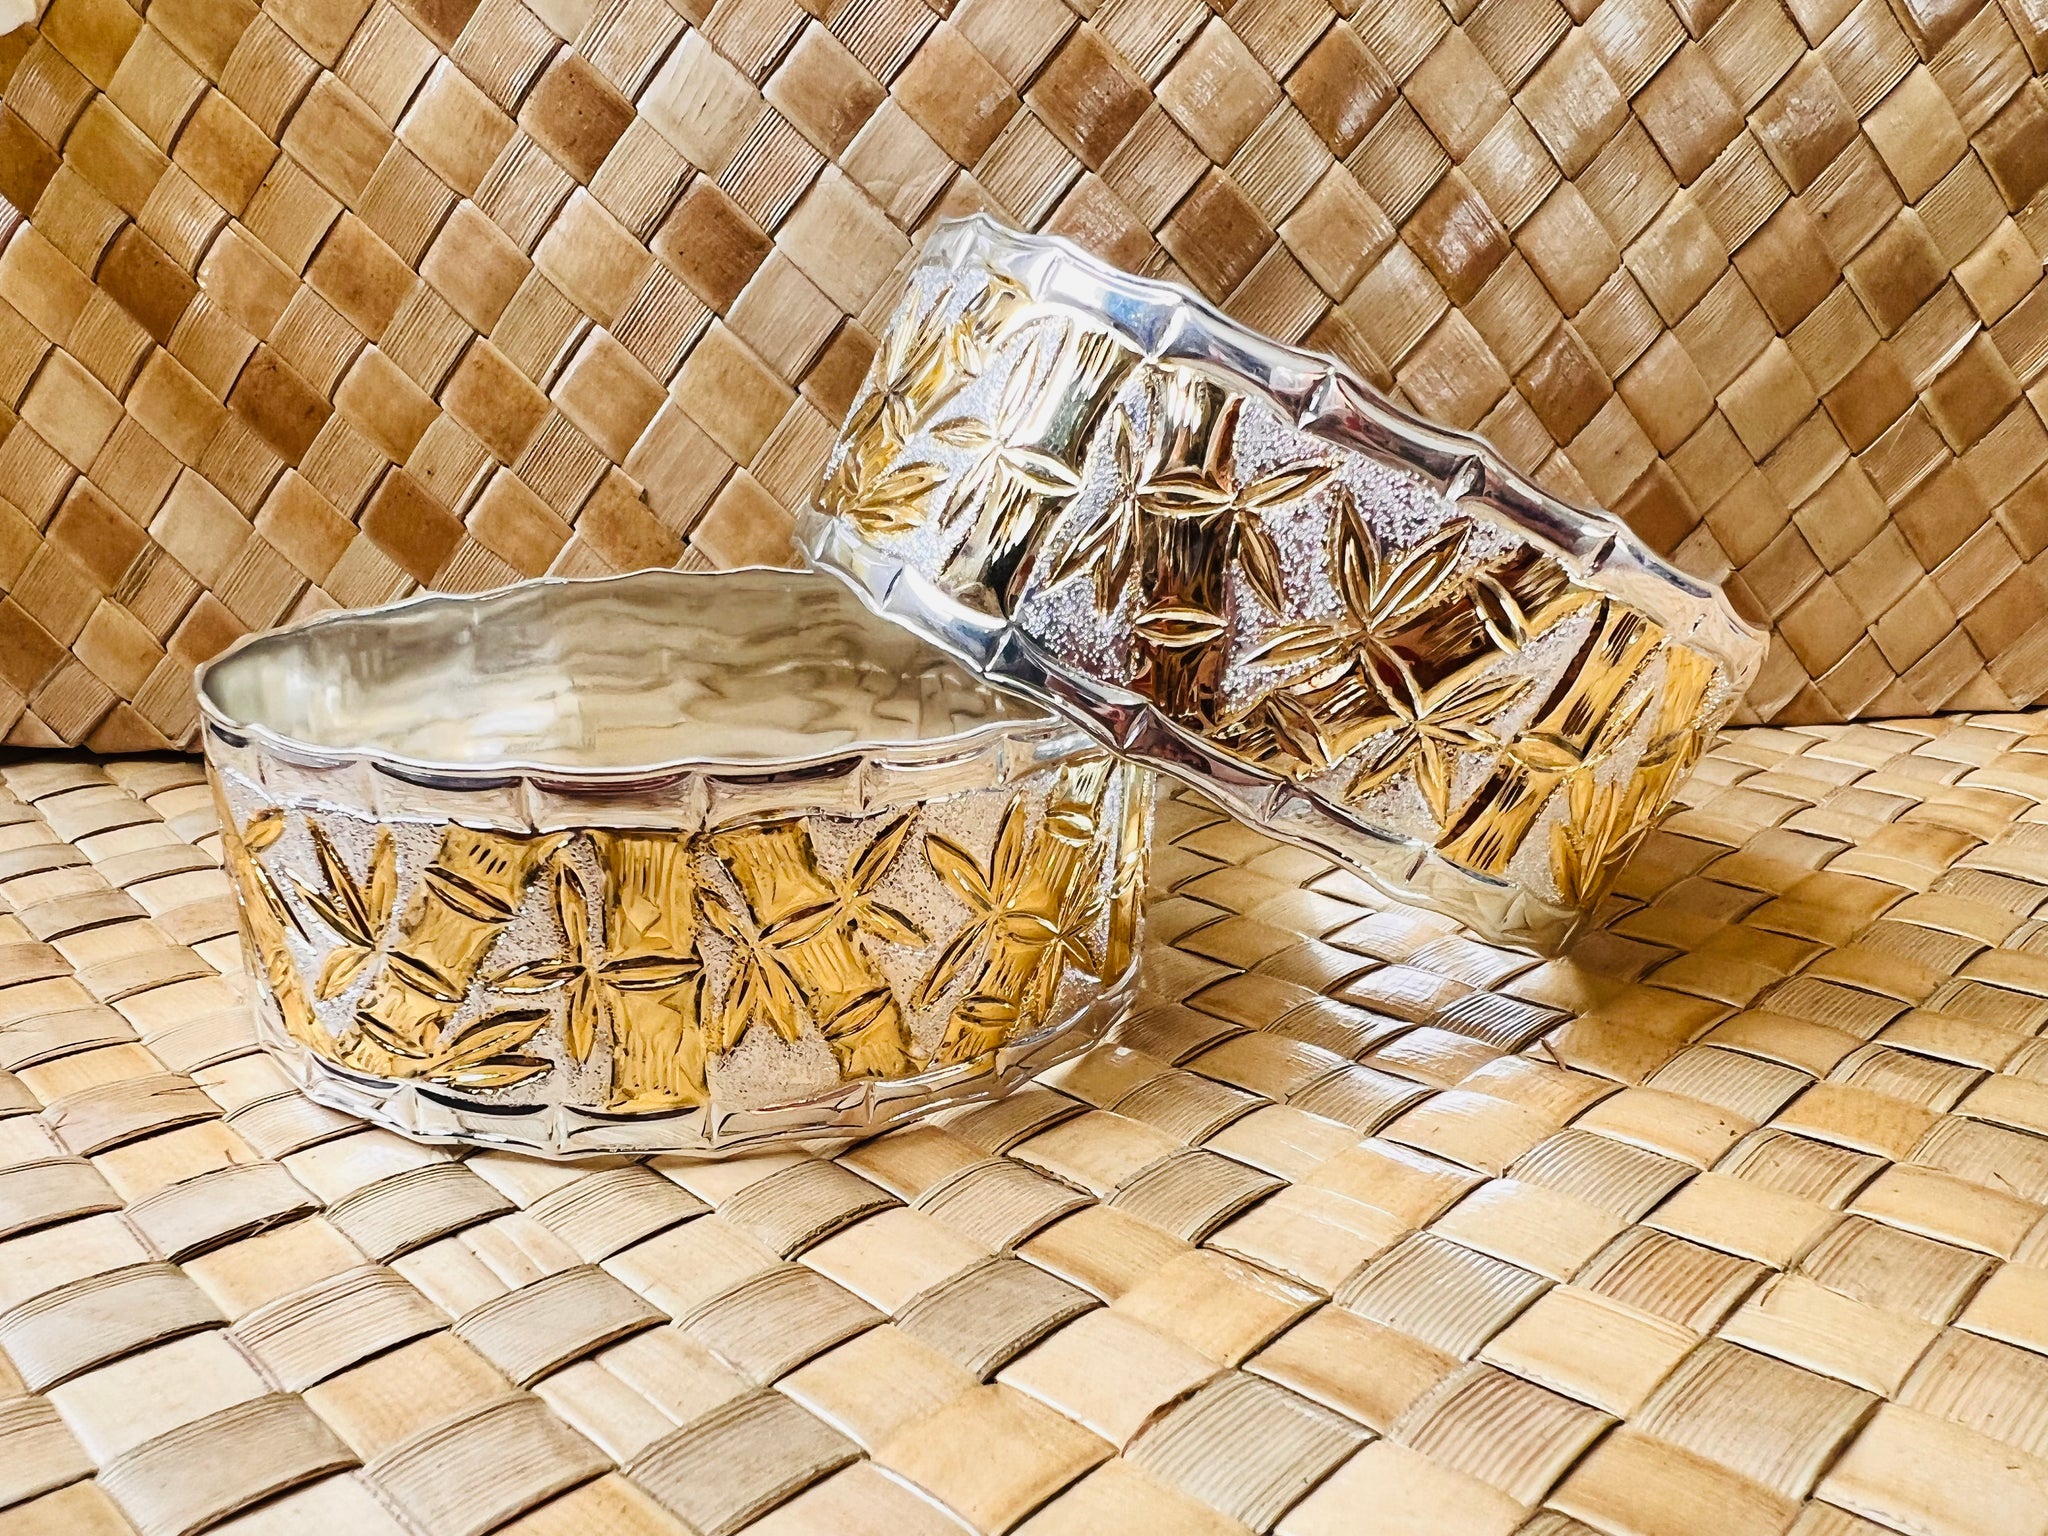 NOW 25% OFF!!!! Bamboo Bangle in Silver & Gold